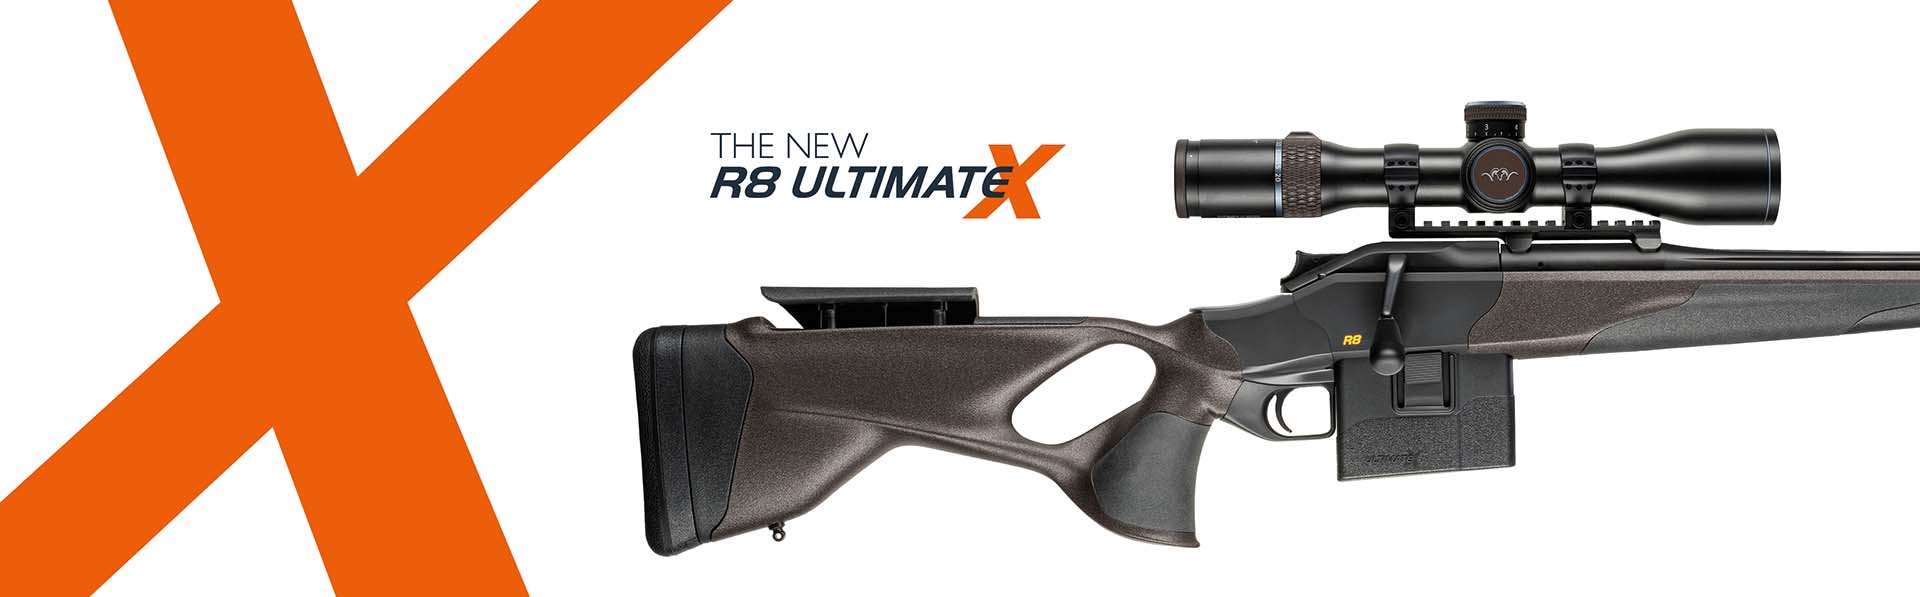 R8 Ultimate X Rifle